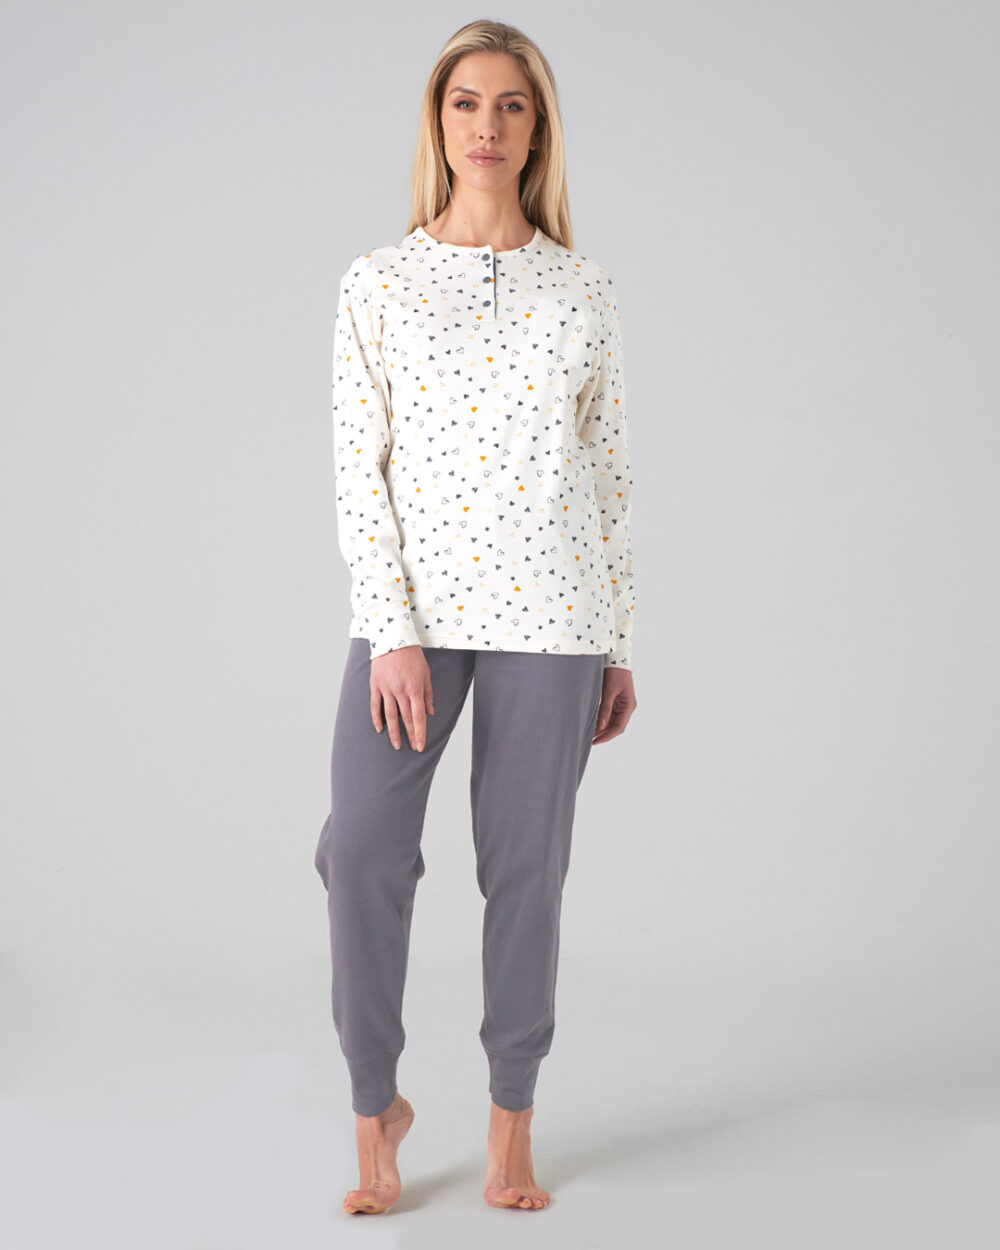 Women's warm cotton pajamas with hearts